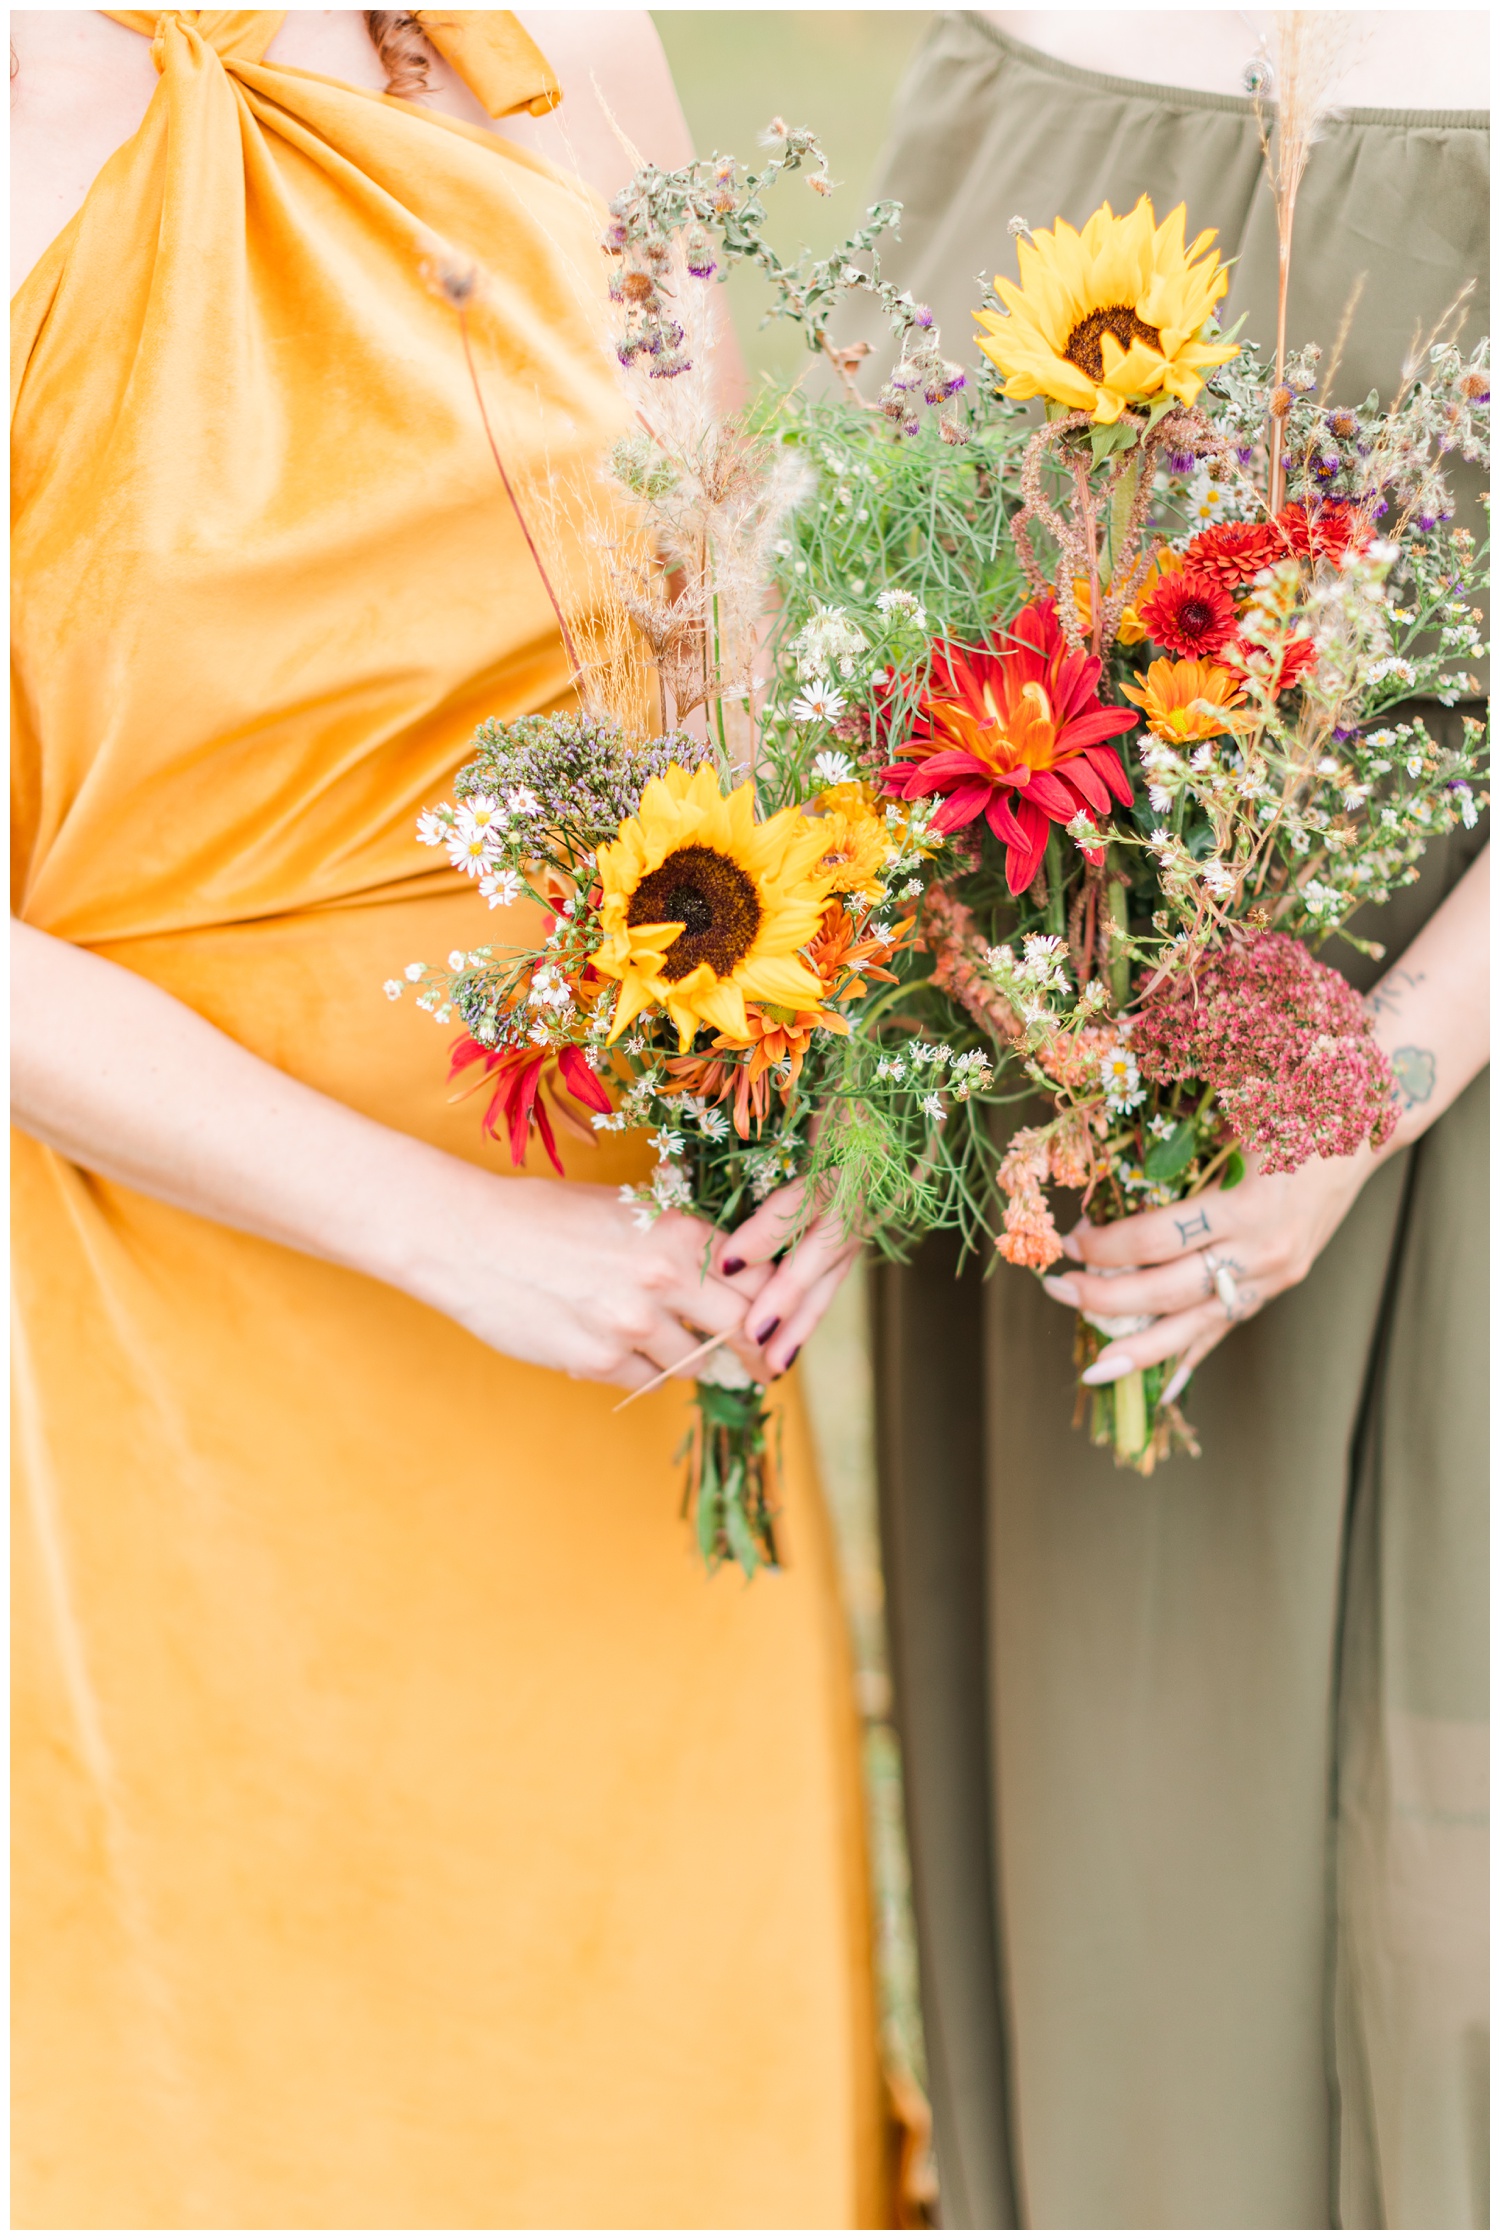 Fresh picked wildflower wedding bridesmaids bouquets featuring sunflowers, mums, cattail, Queen Anne's lace and pampas grass | CB Studio